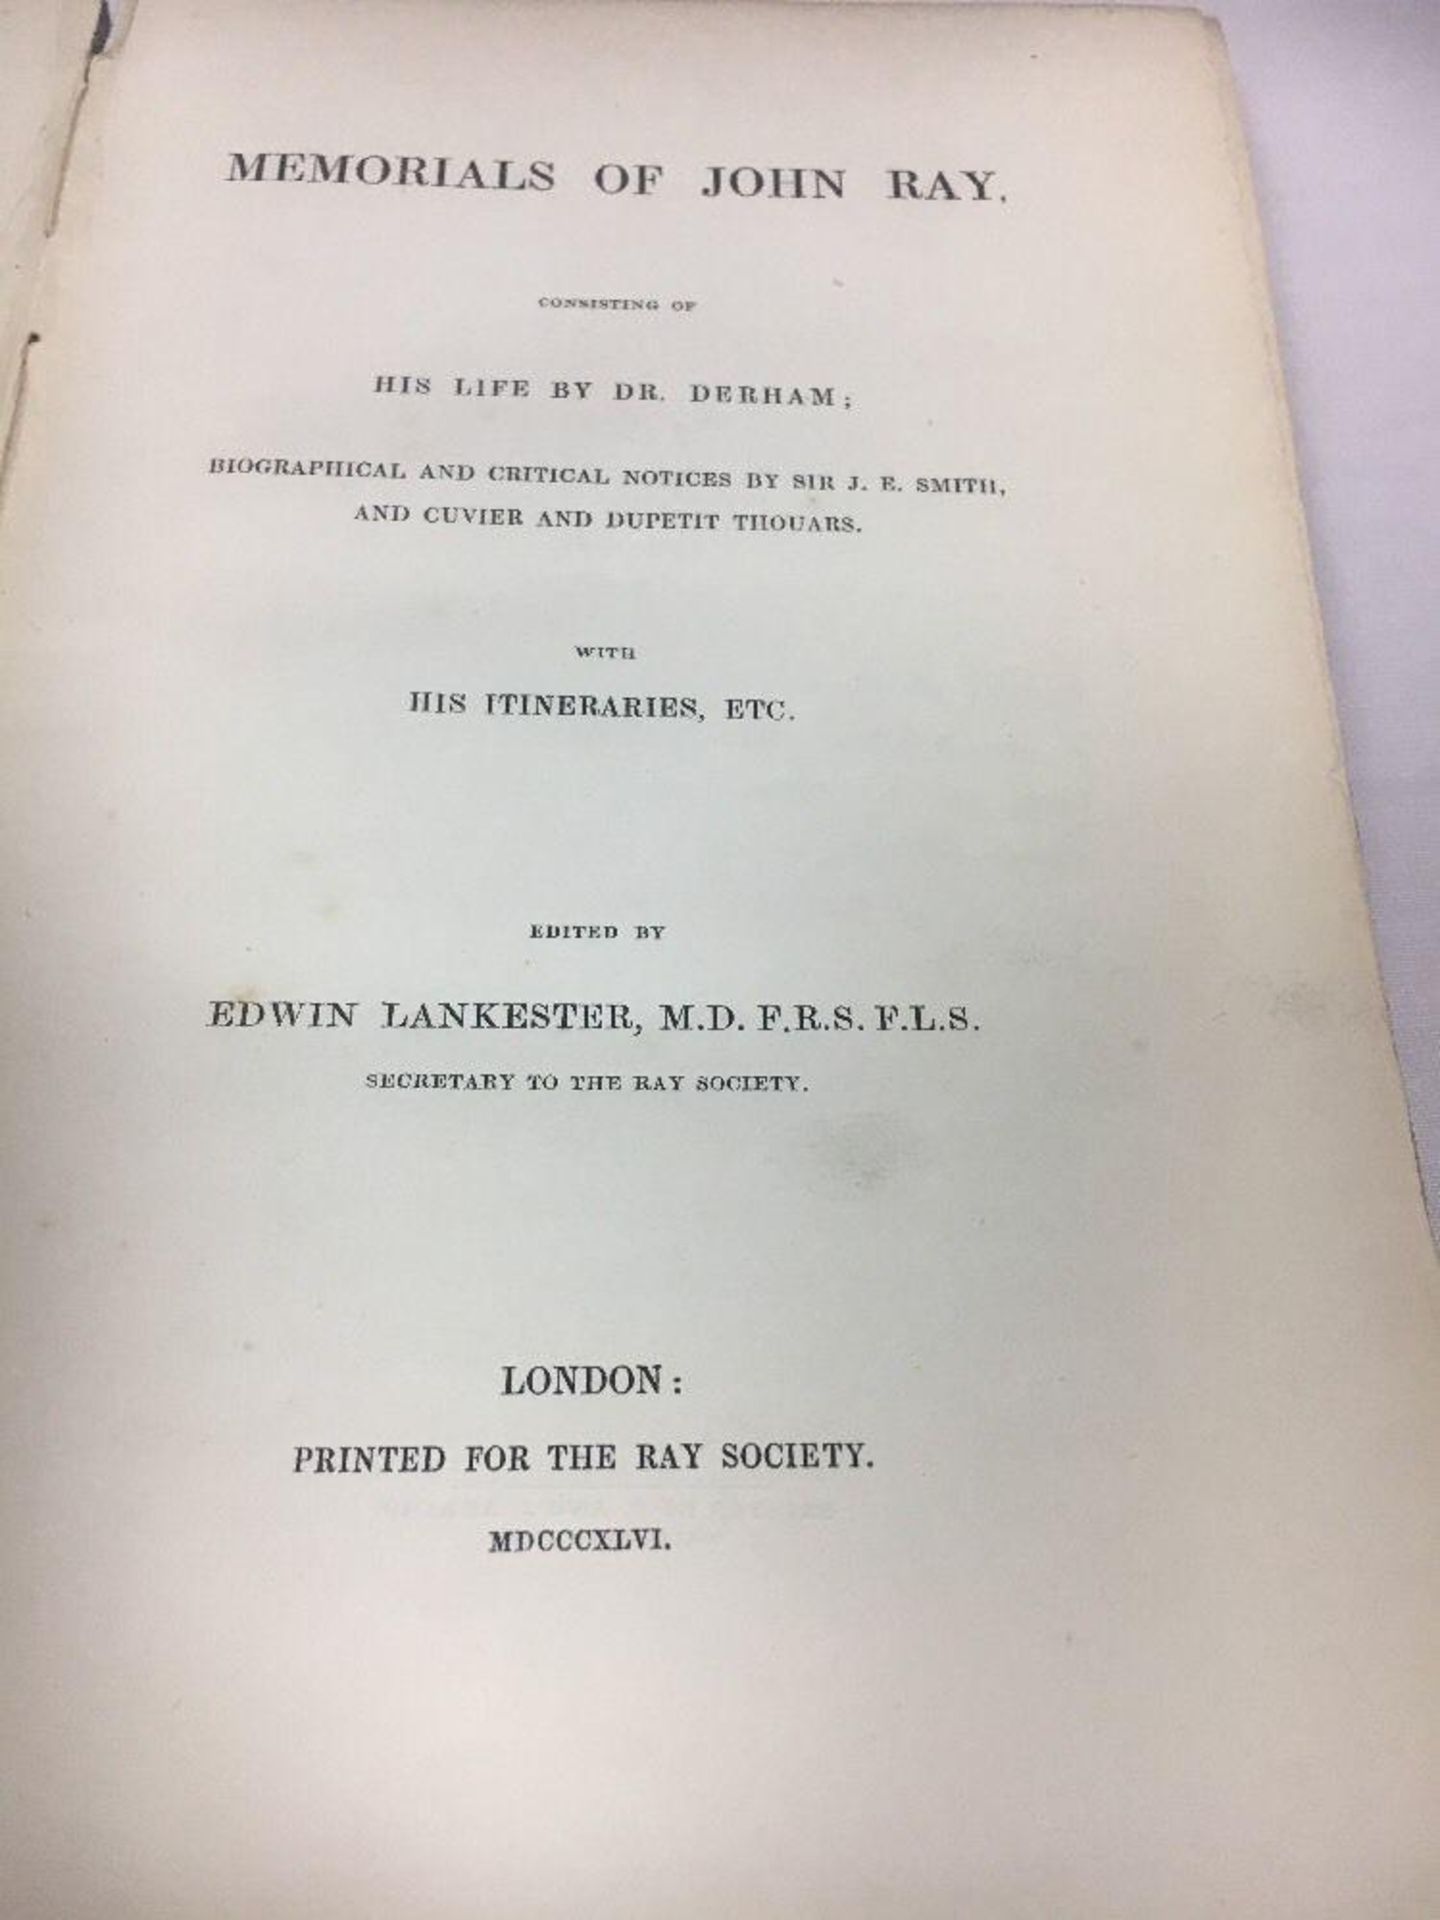 ANTIQUE BOOK - MEMORIALS OF JOHN RAY HIS LIFE BY DR. DERHAM THE RAY SOCIETY 1846 - Image 4 of 4